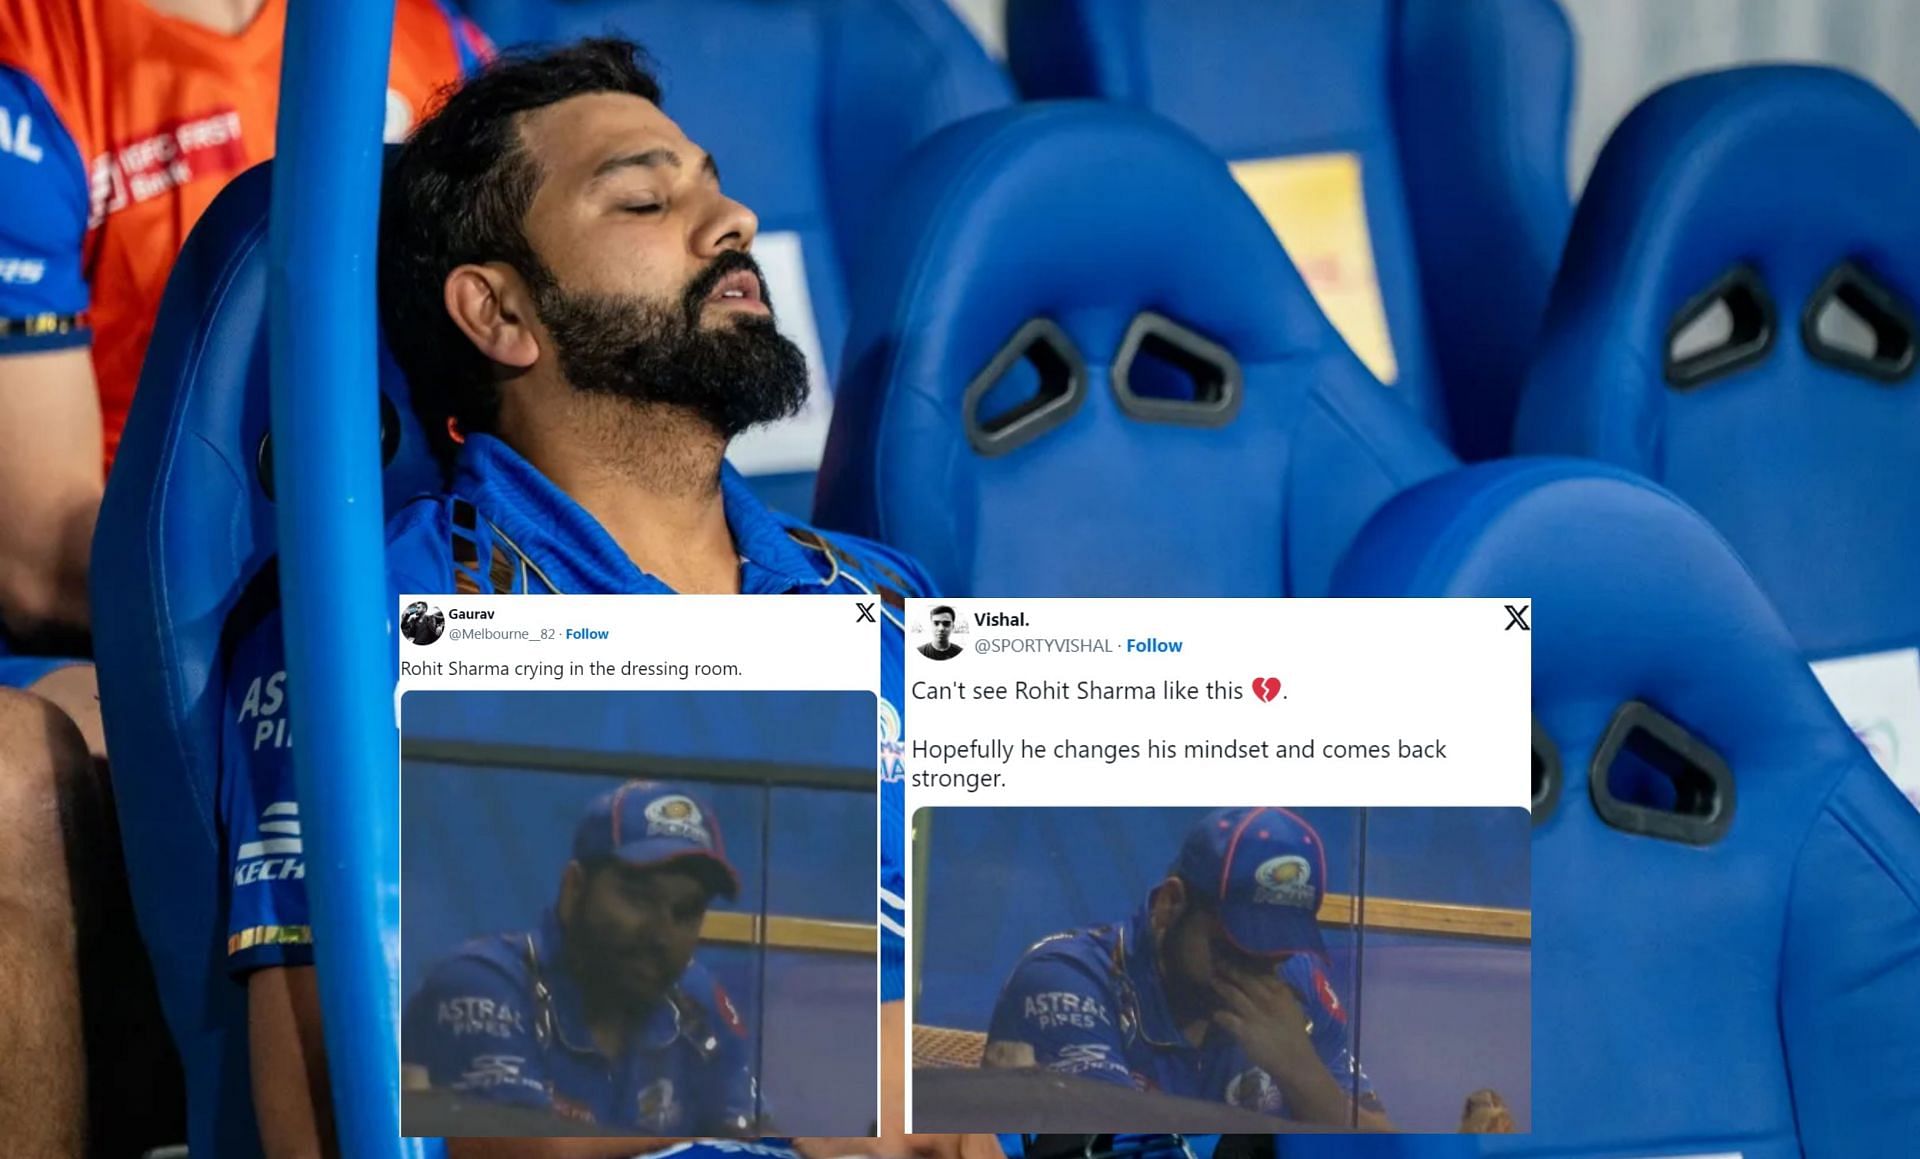 Rohit Sharma looked dejected in the dressing room after dismissal in Monday